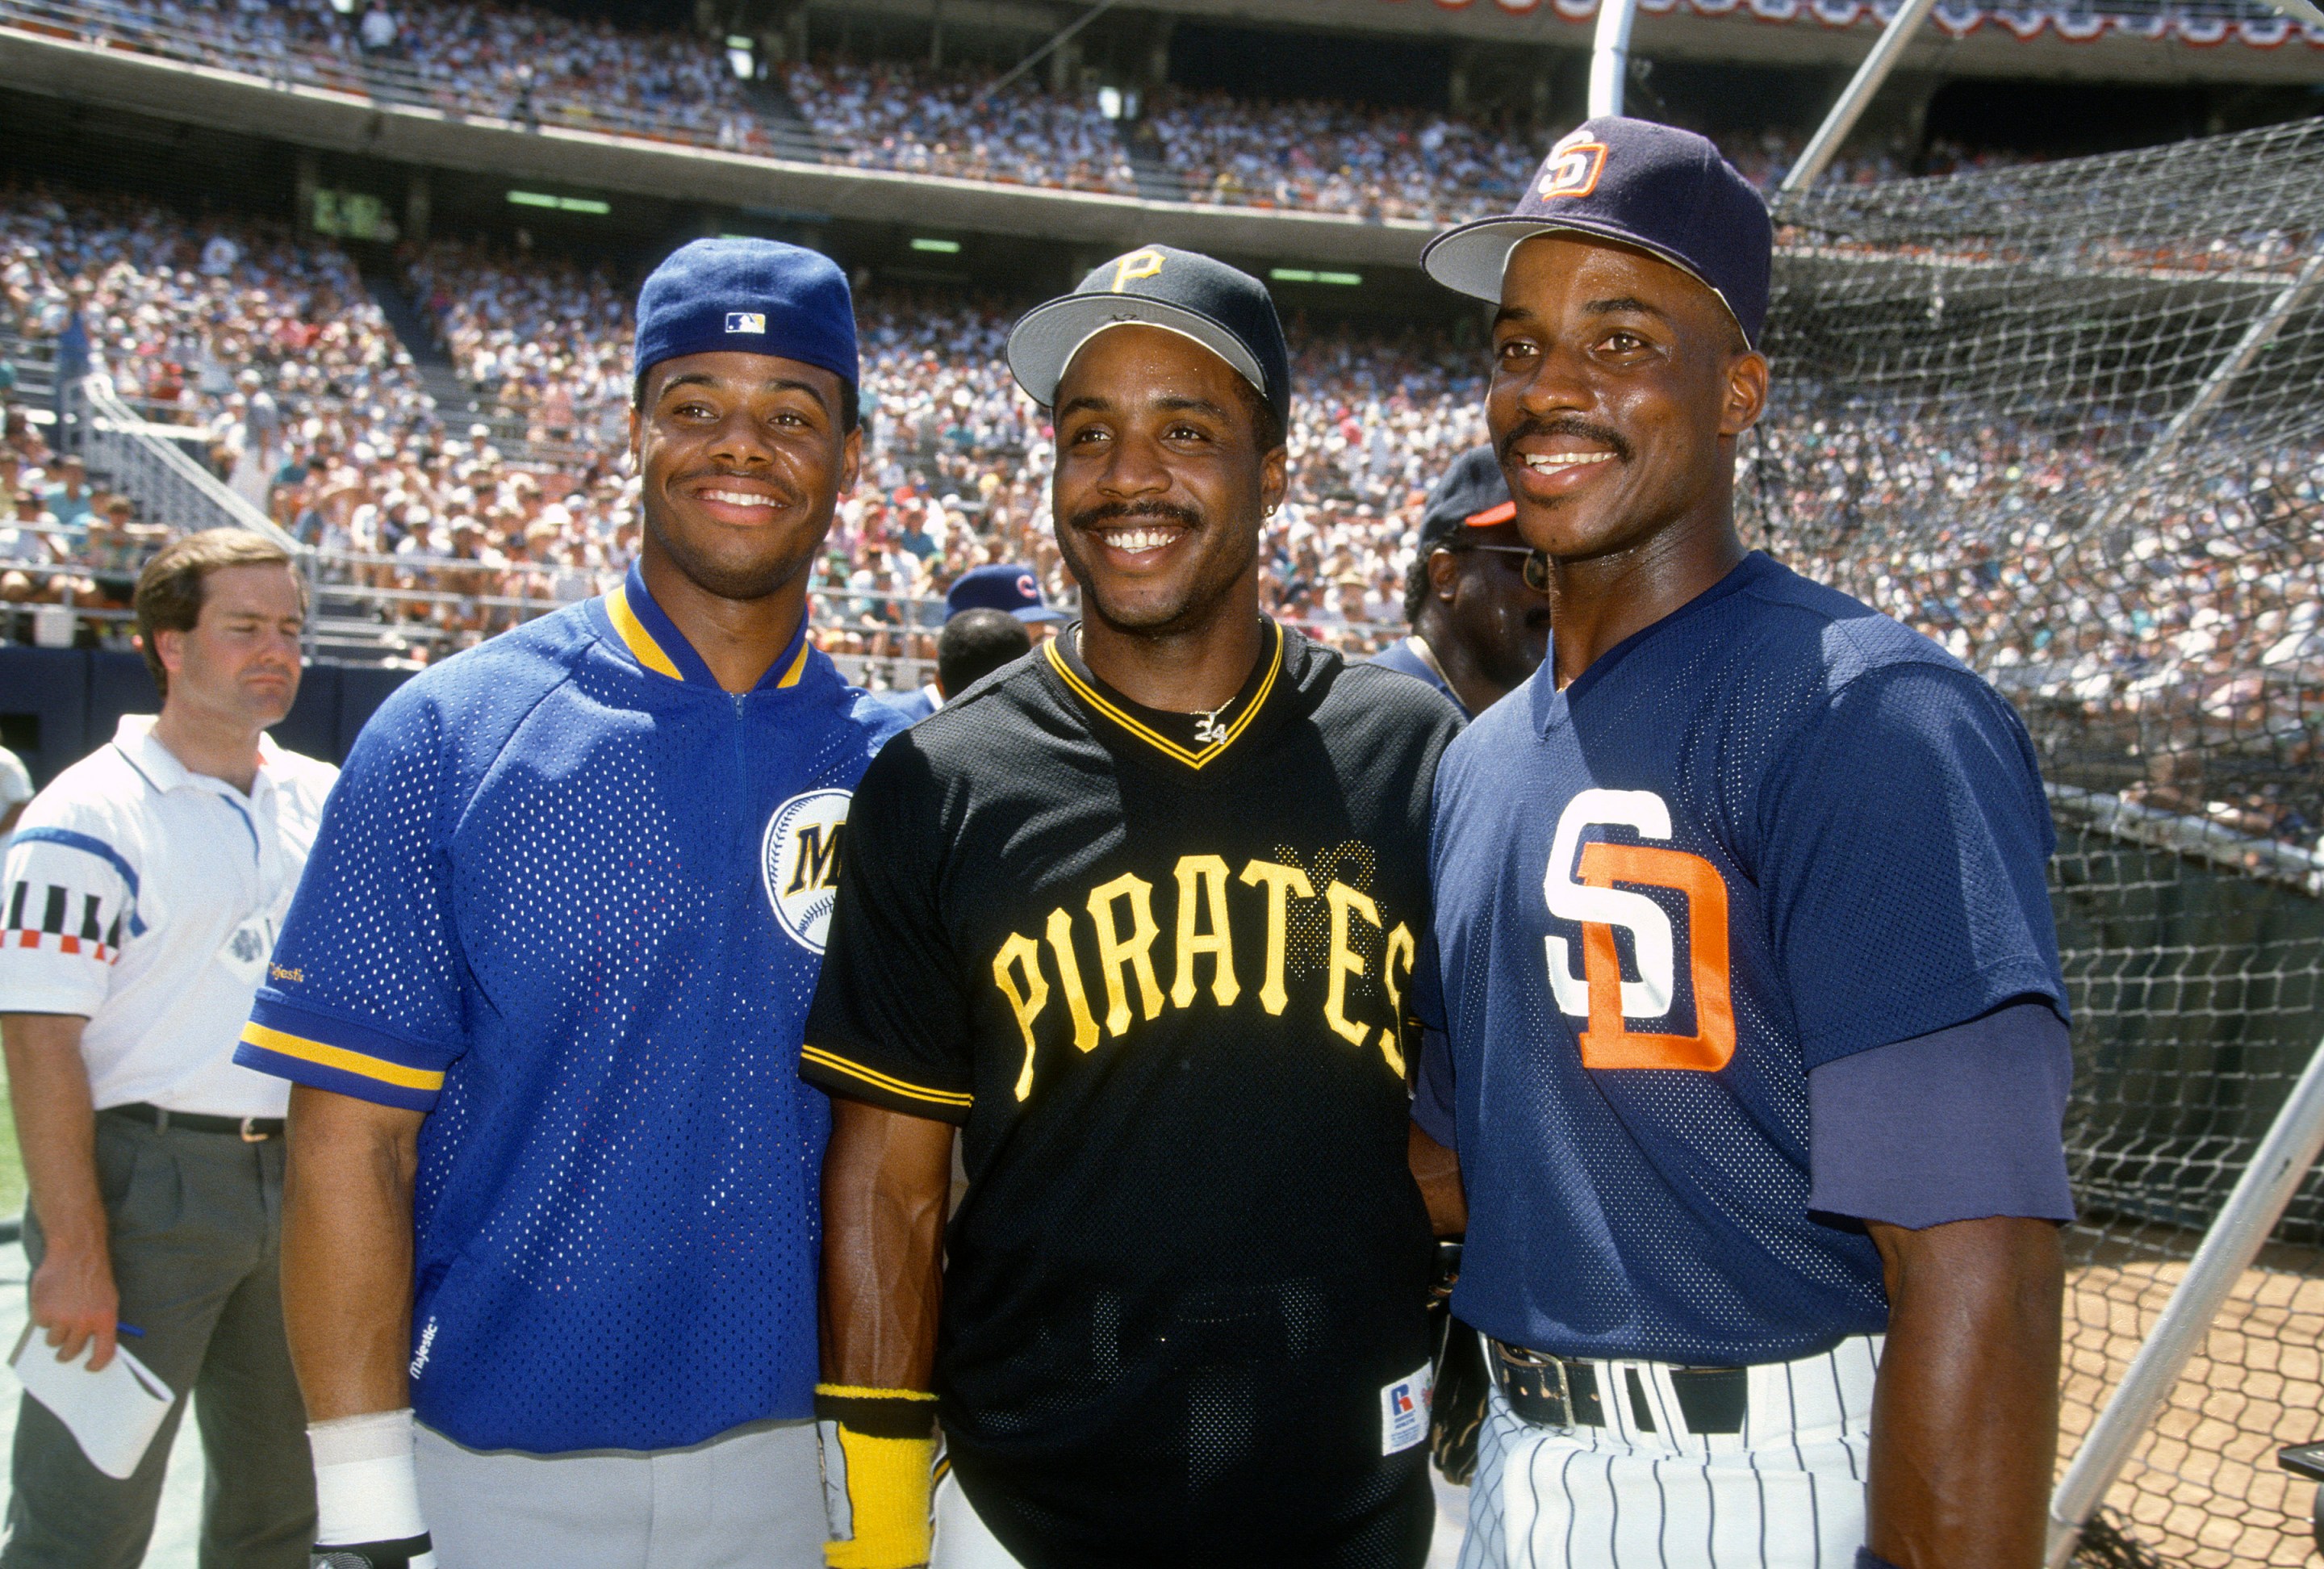 SAN DIEGO, CA - JULY 14: Ken Griffey Jr #24 of the Seattle Mariners, Barry Bonds #24 of the Pittsburgh Pirates and Fred McGriff #19 of the San Diego Padres poses together for this portrait during batting practice prior to the 1992 Major League Baseball All-Star game July 14, 1992 at Jack Murphy Stadium in San Diego, California. The American League beat the National League 13-6. (Photo by Focus on Sport/Getty Images)